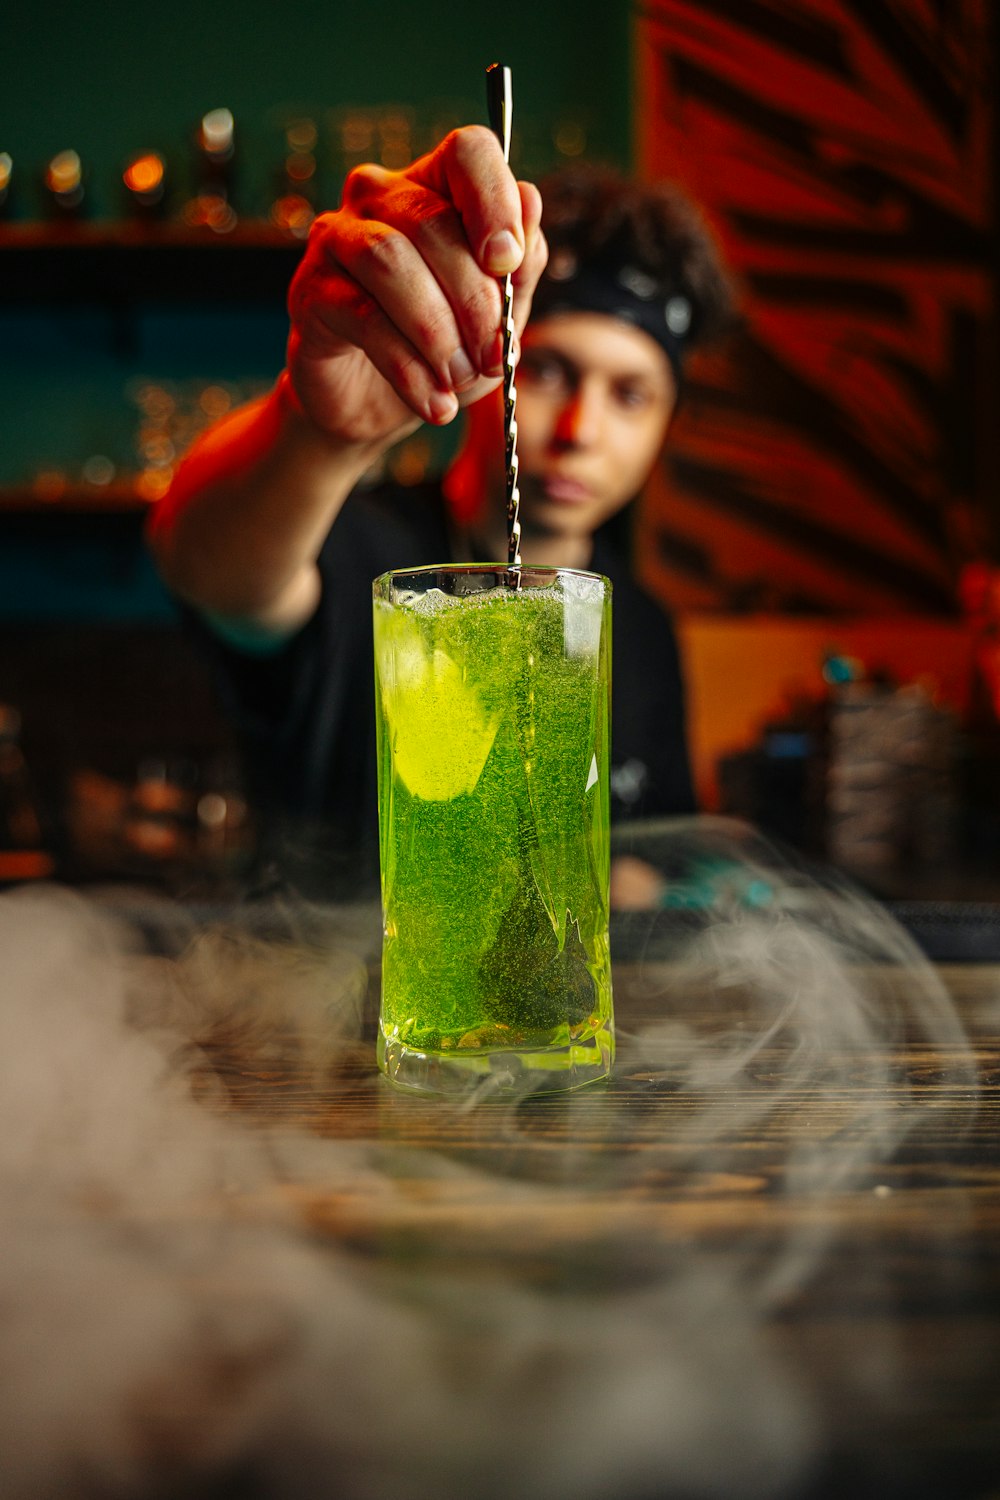 a person is holding a stick above a green drink